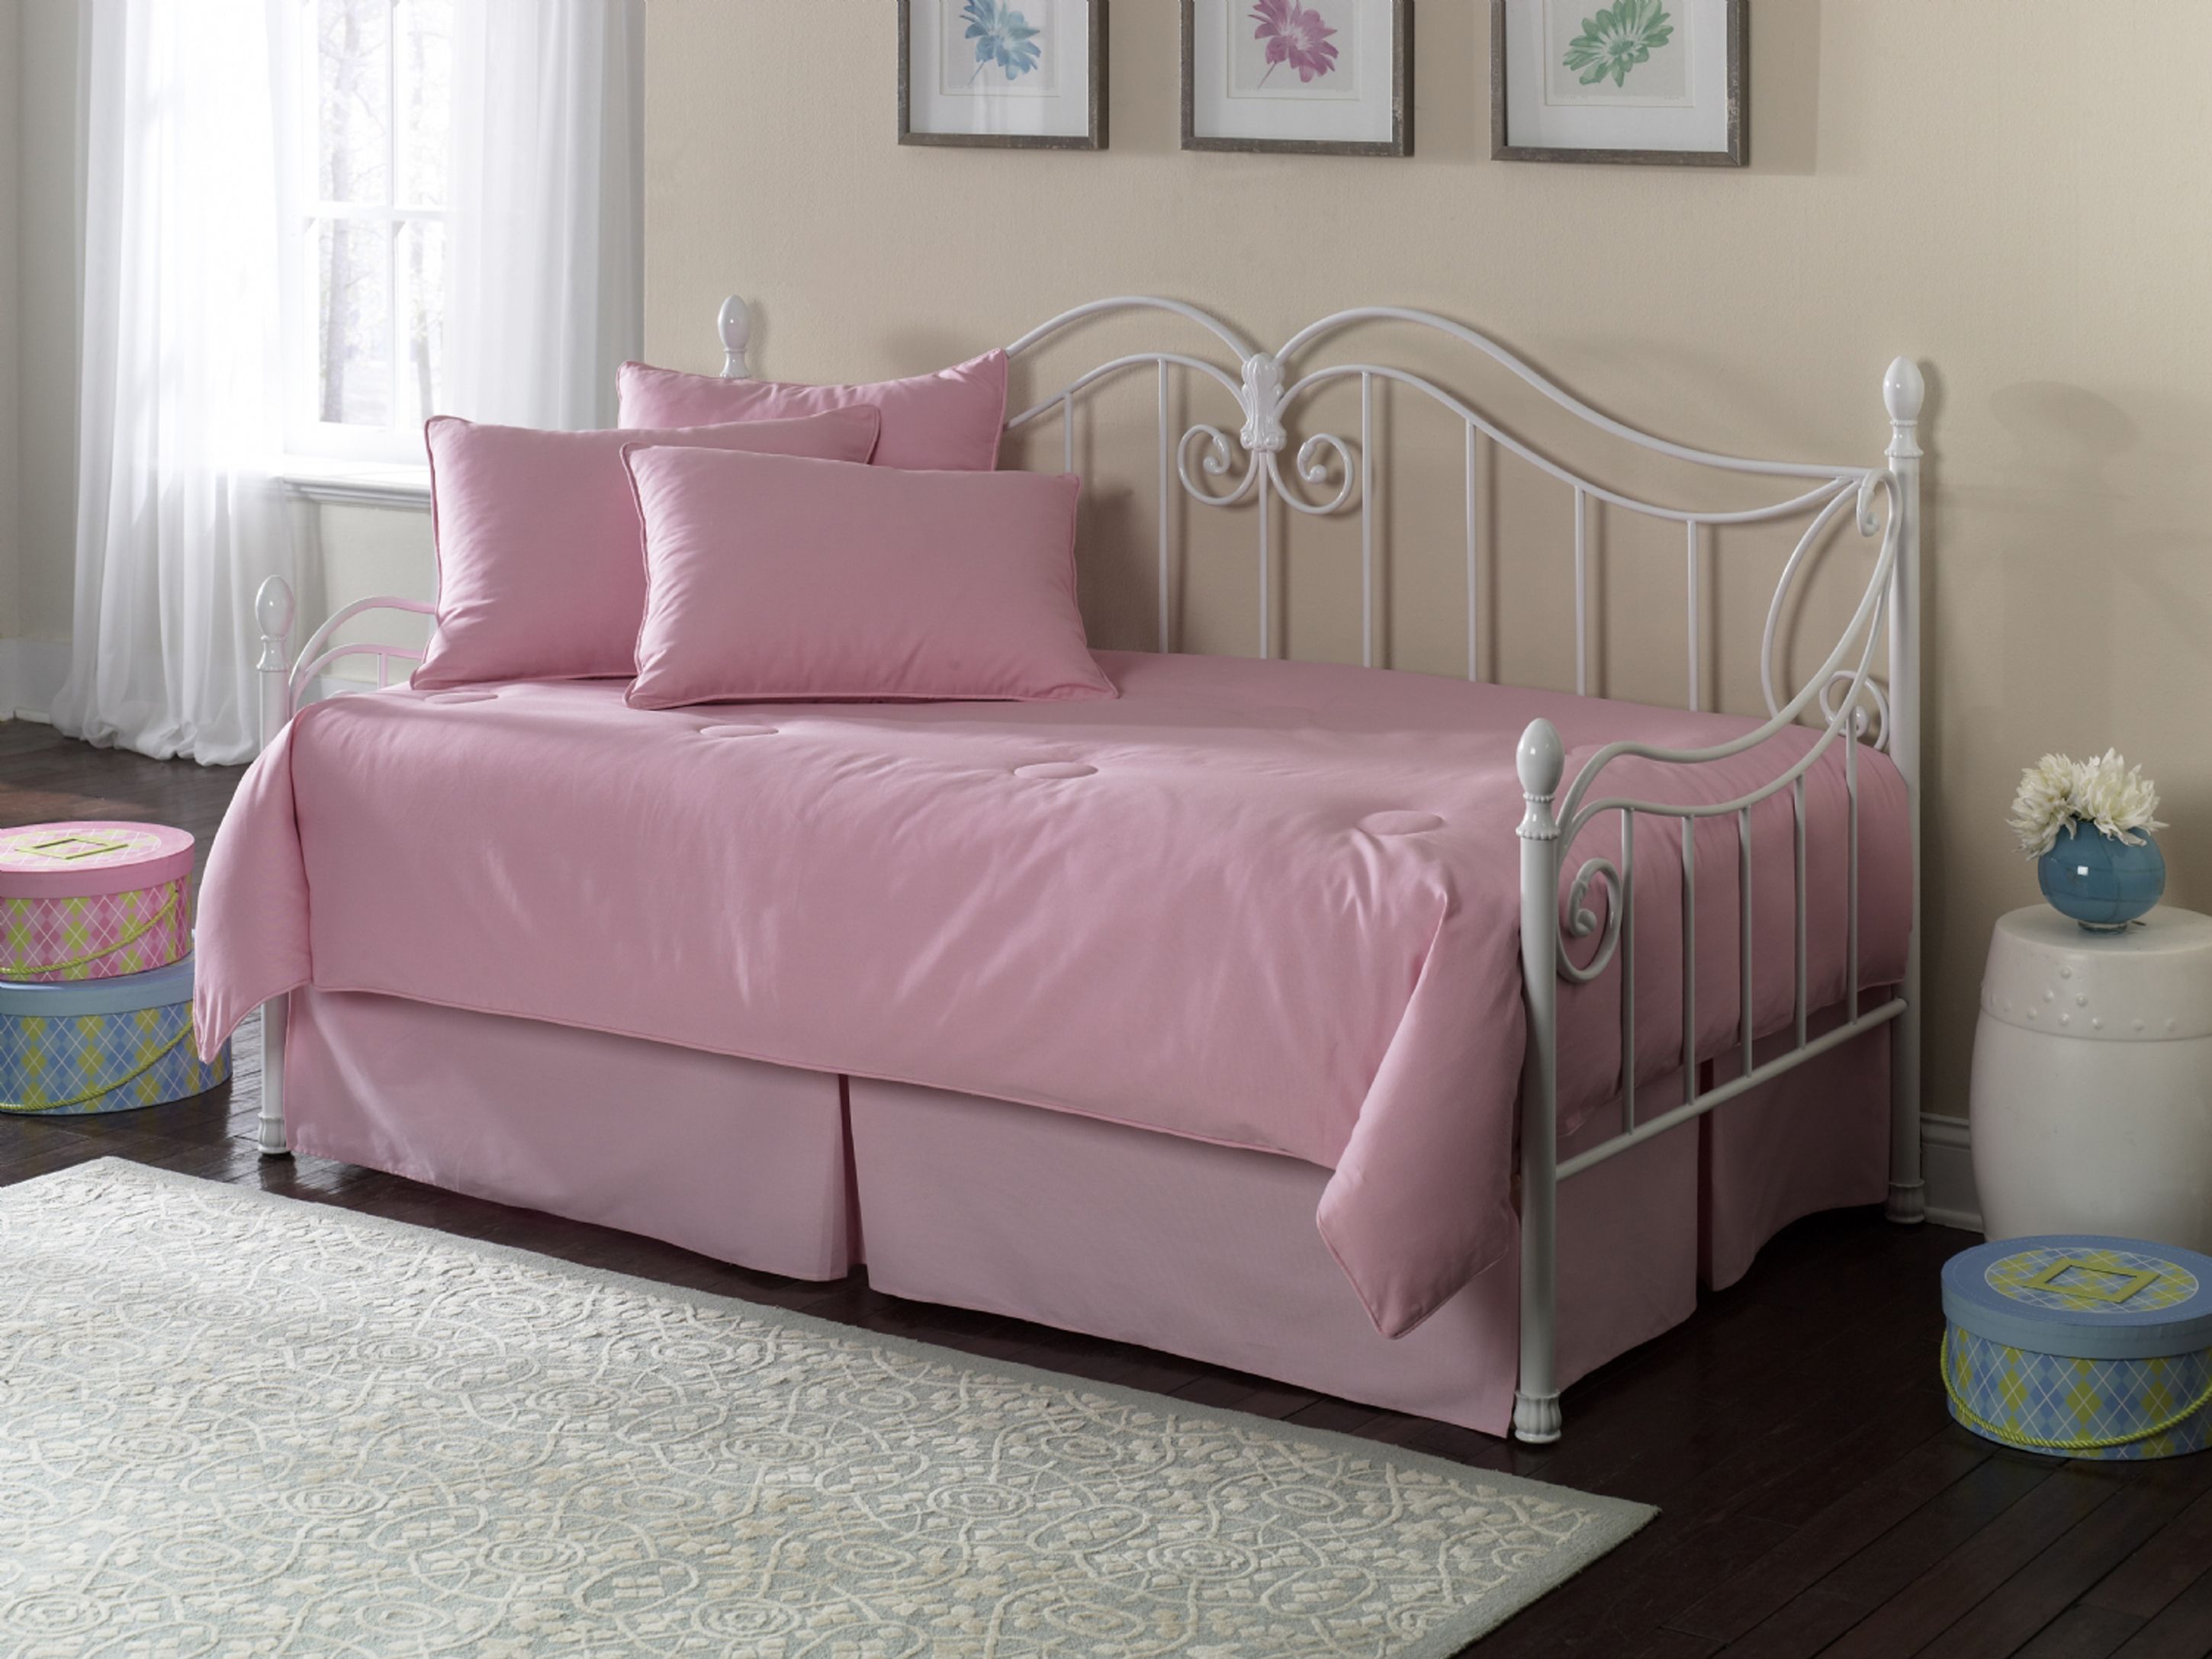 Romantic White White Daybed Design Idea With Trundle With Pink Bed Sheet Pink Pillow Cream Wall And Gray Rug Beautiful Daybed Design Ideas With Trundle (View 7 of 39)